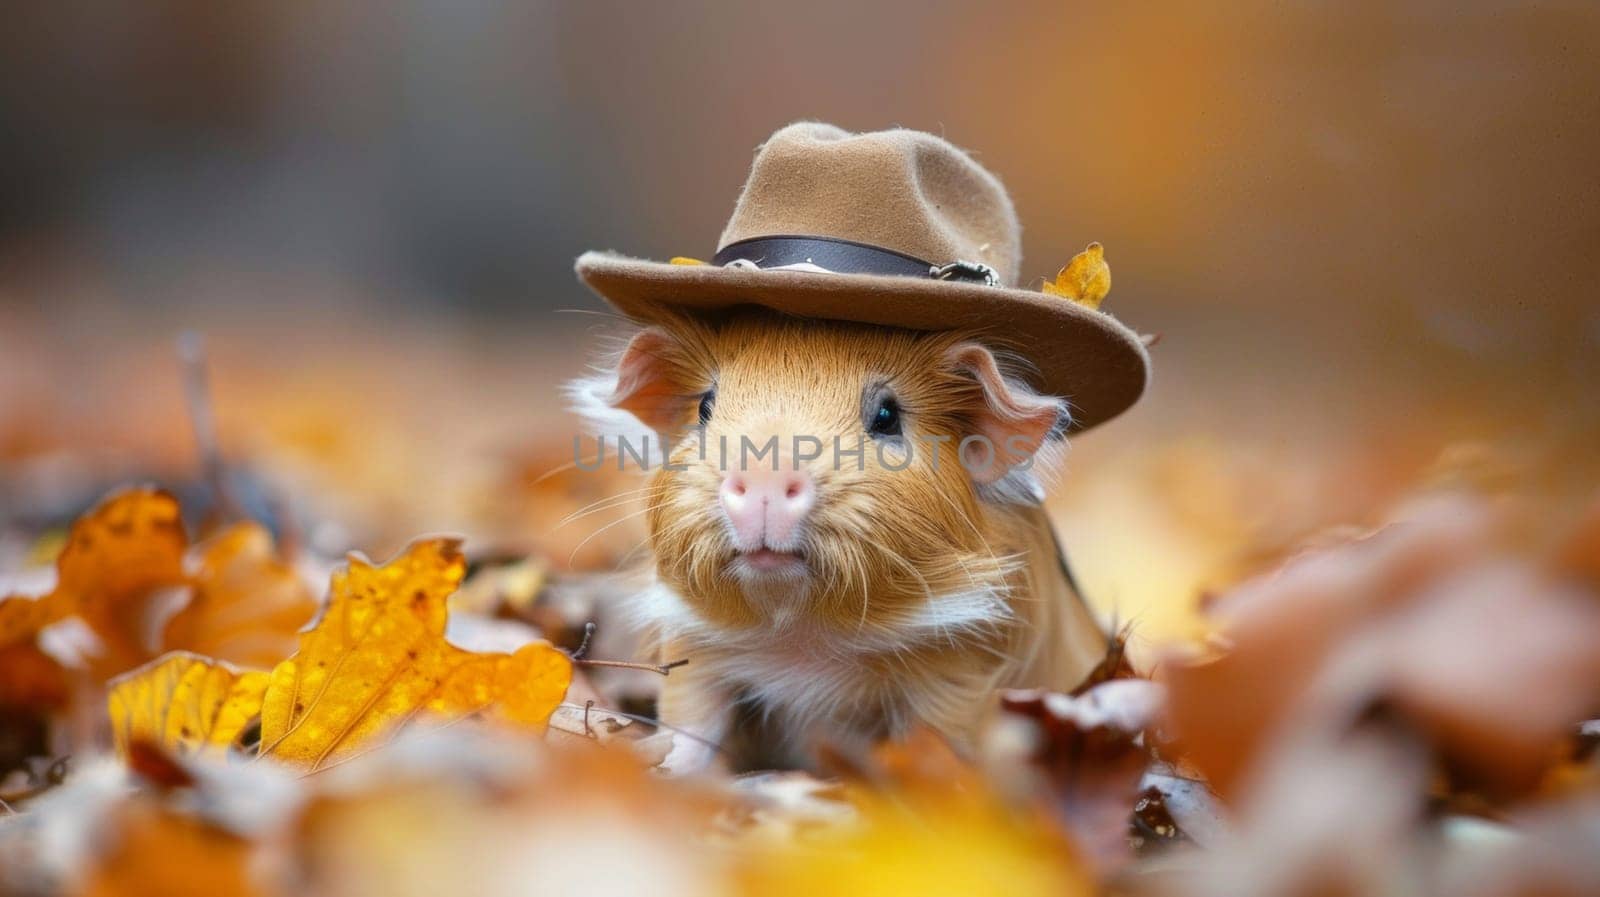 A small brown and white guinea pig wearing a hat in the leaves